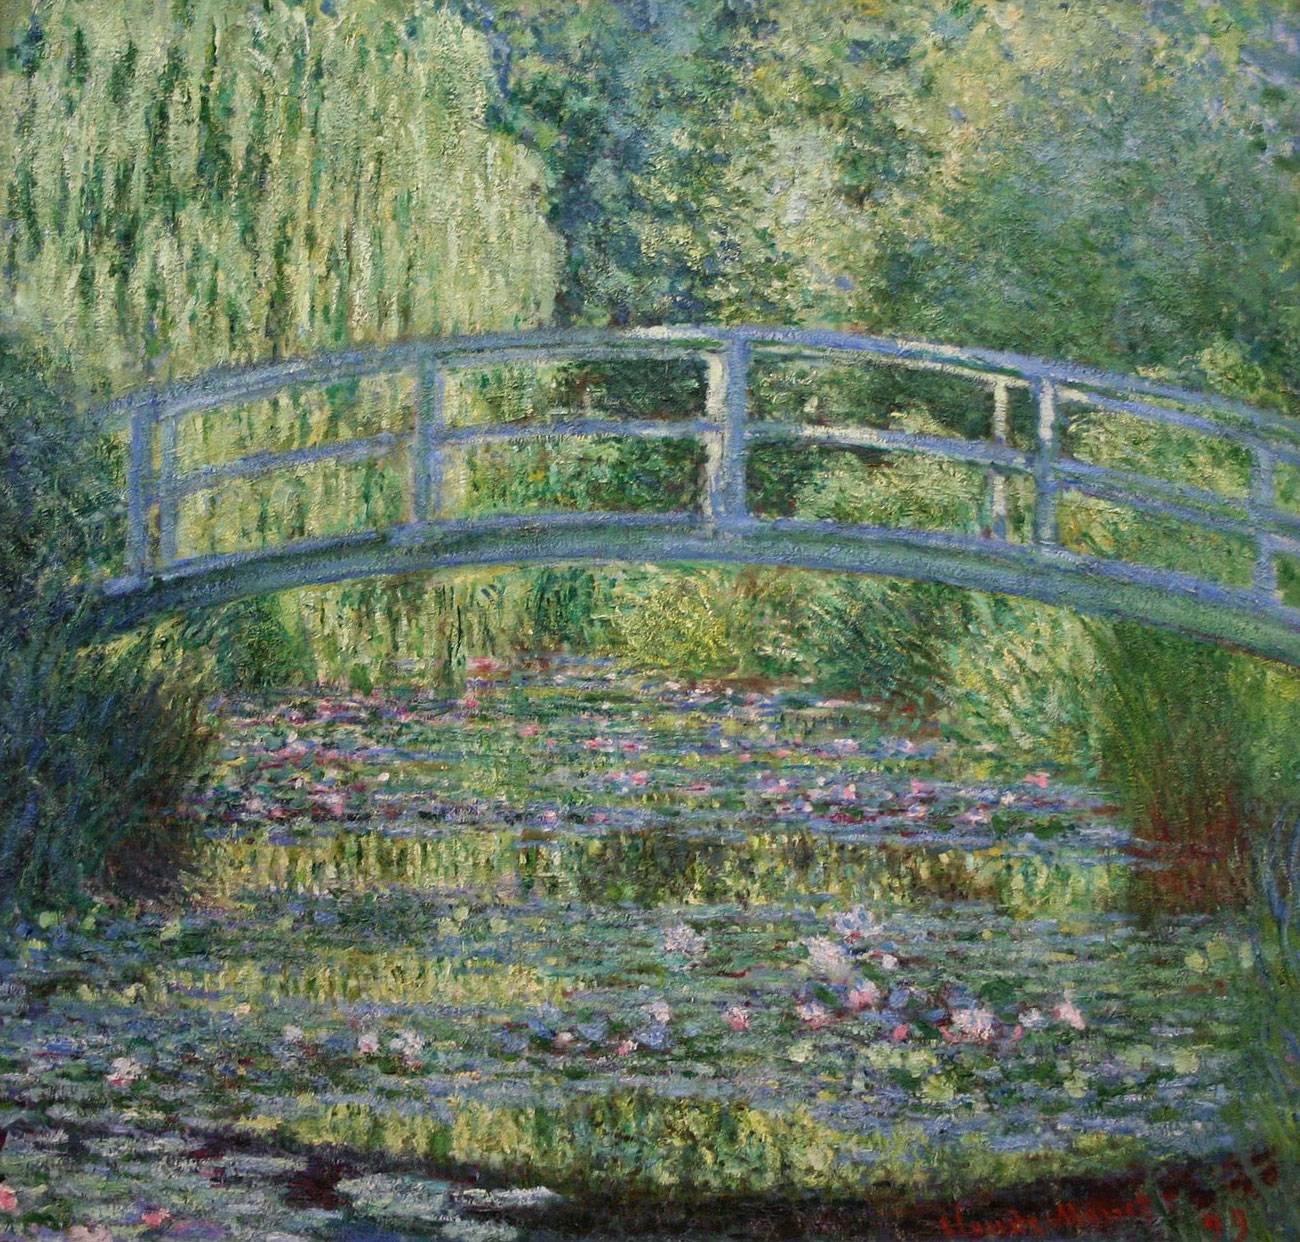 Water Lilies and Japanese Bridge by Claude Monet - 1899 - 89.5 × 92.5 cm Musée d'Orsay